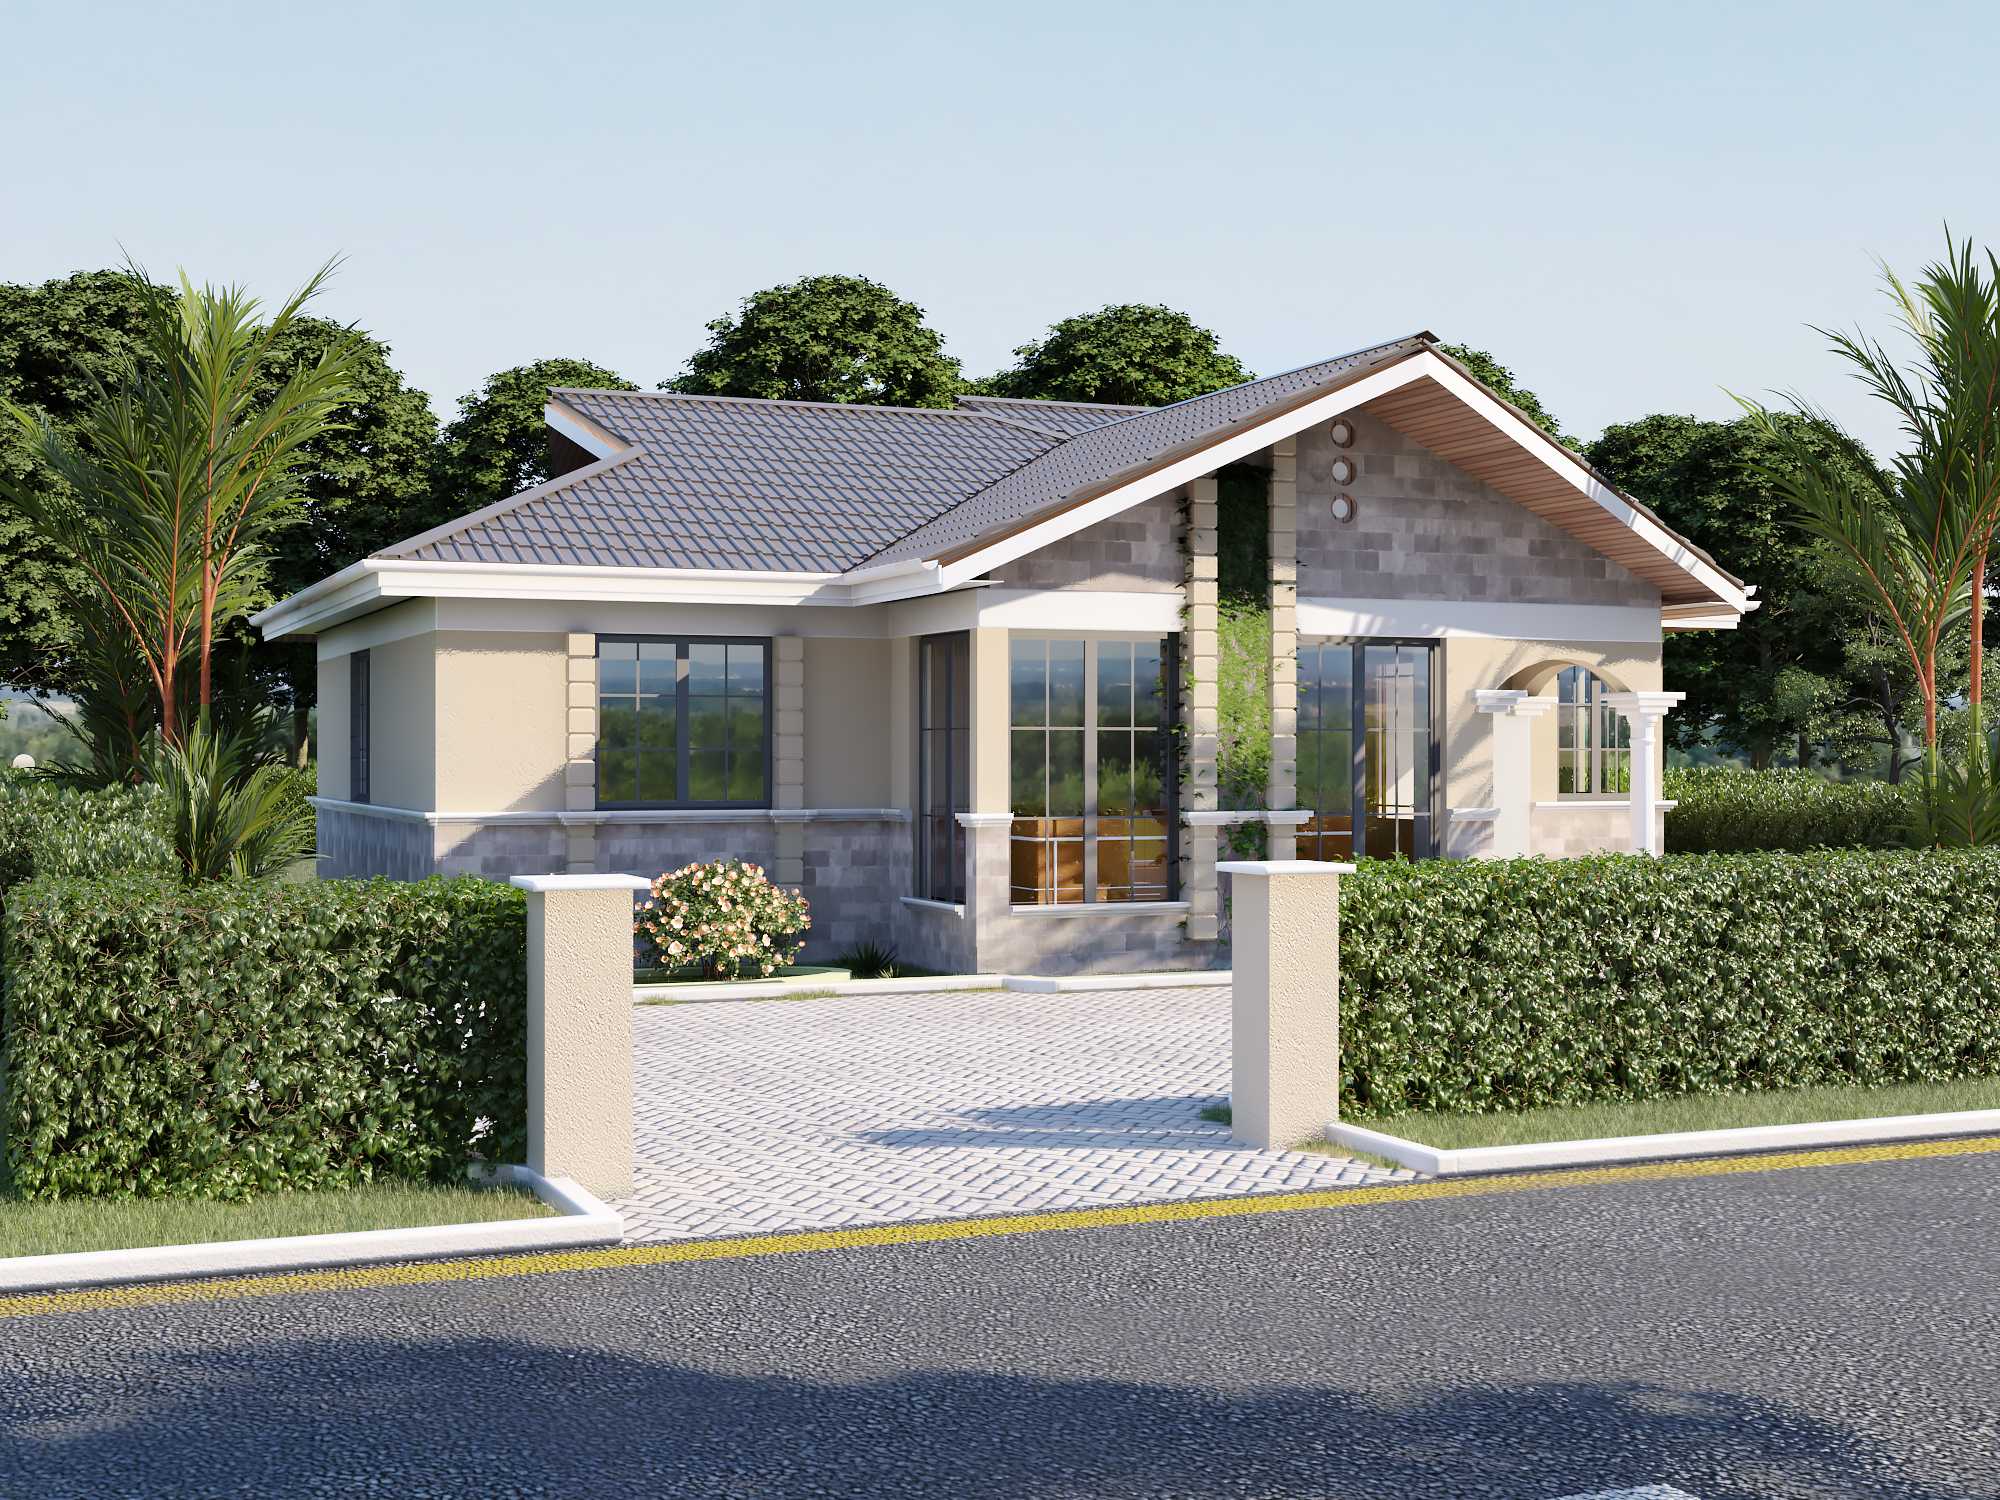 Inuua Bungalow House Plans, Architectural Drawings, Engineering Drawings and Bills of Materials & Labour